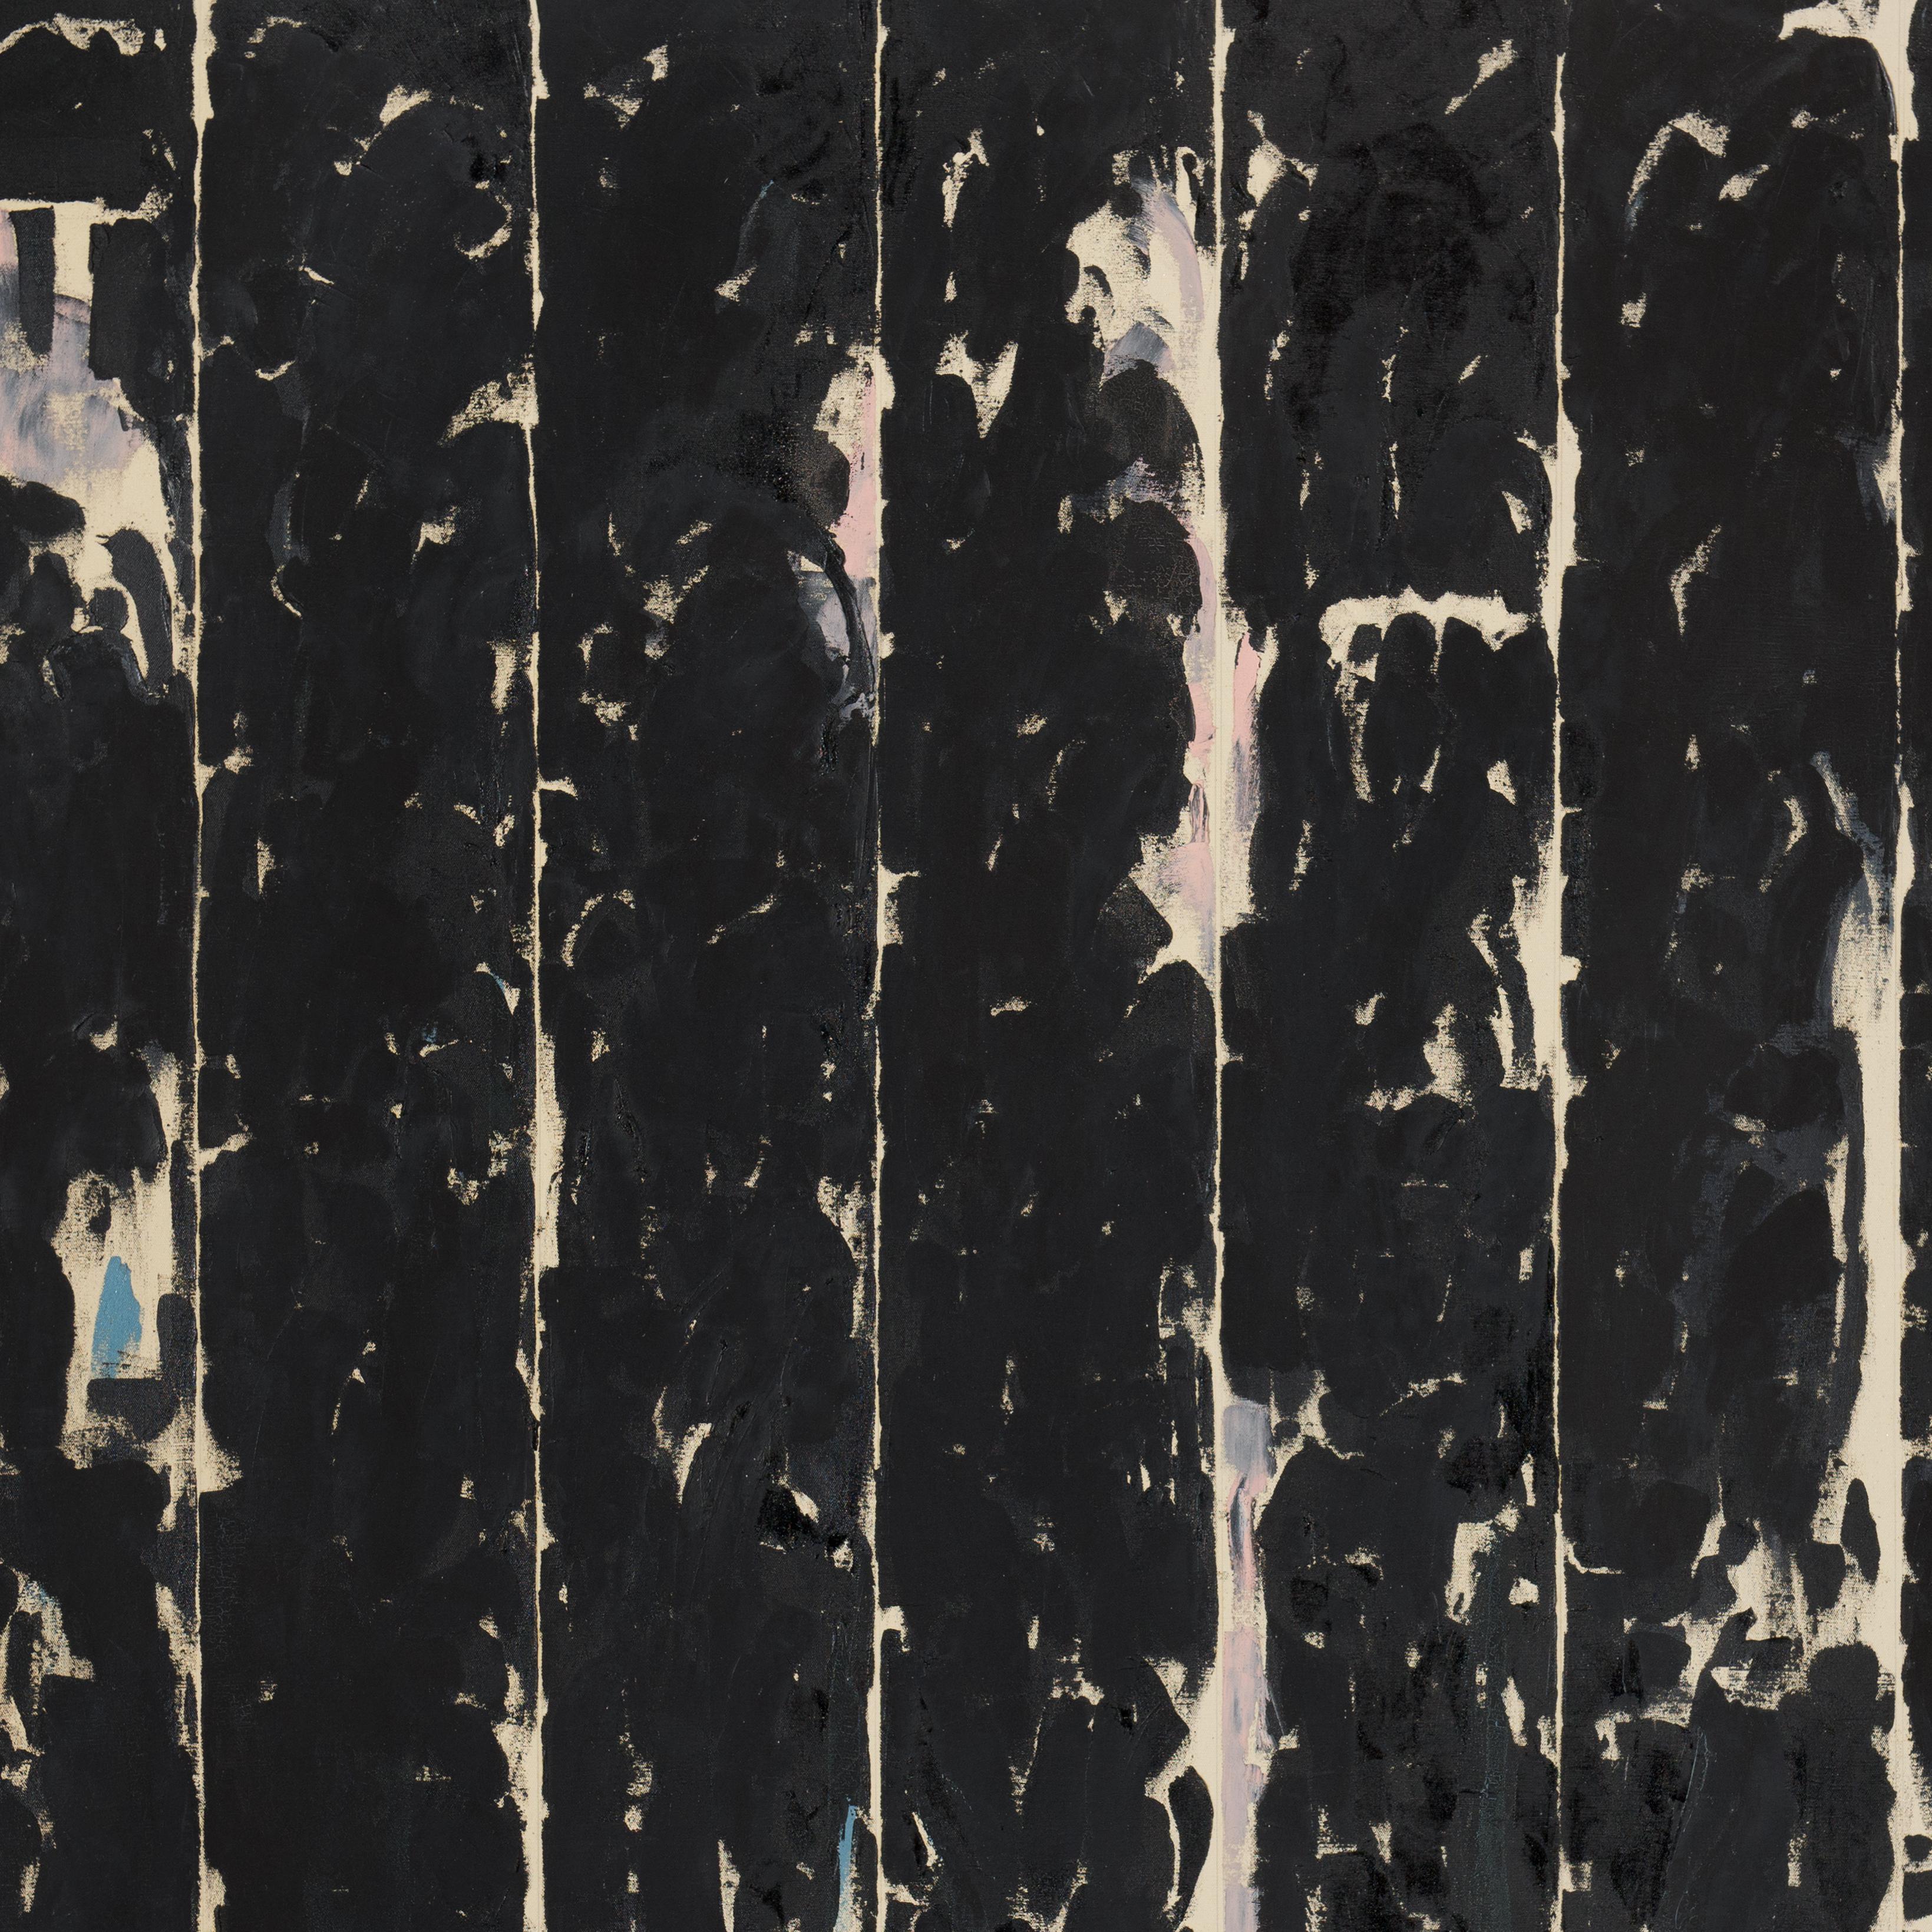 Water Street (7.79) - Black Abstract Painting by Mala Breuer